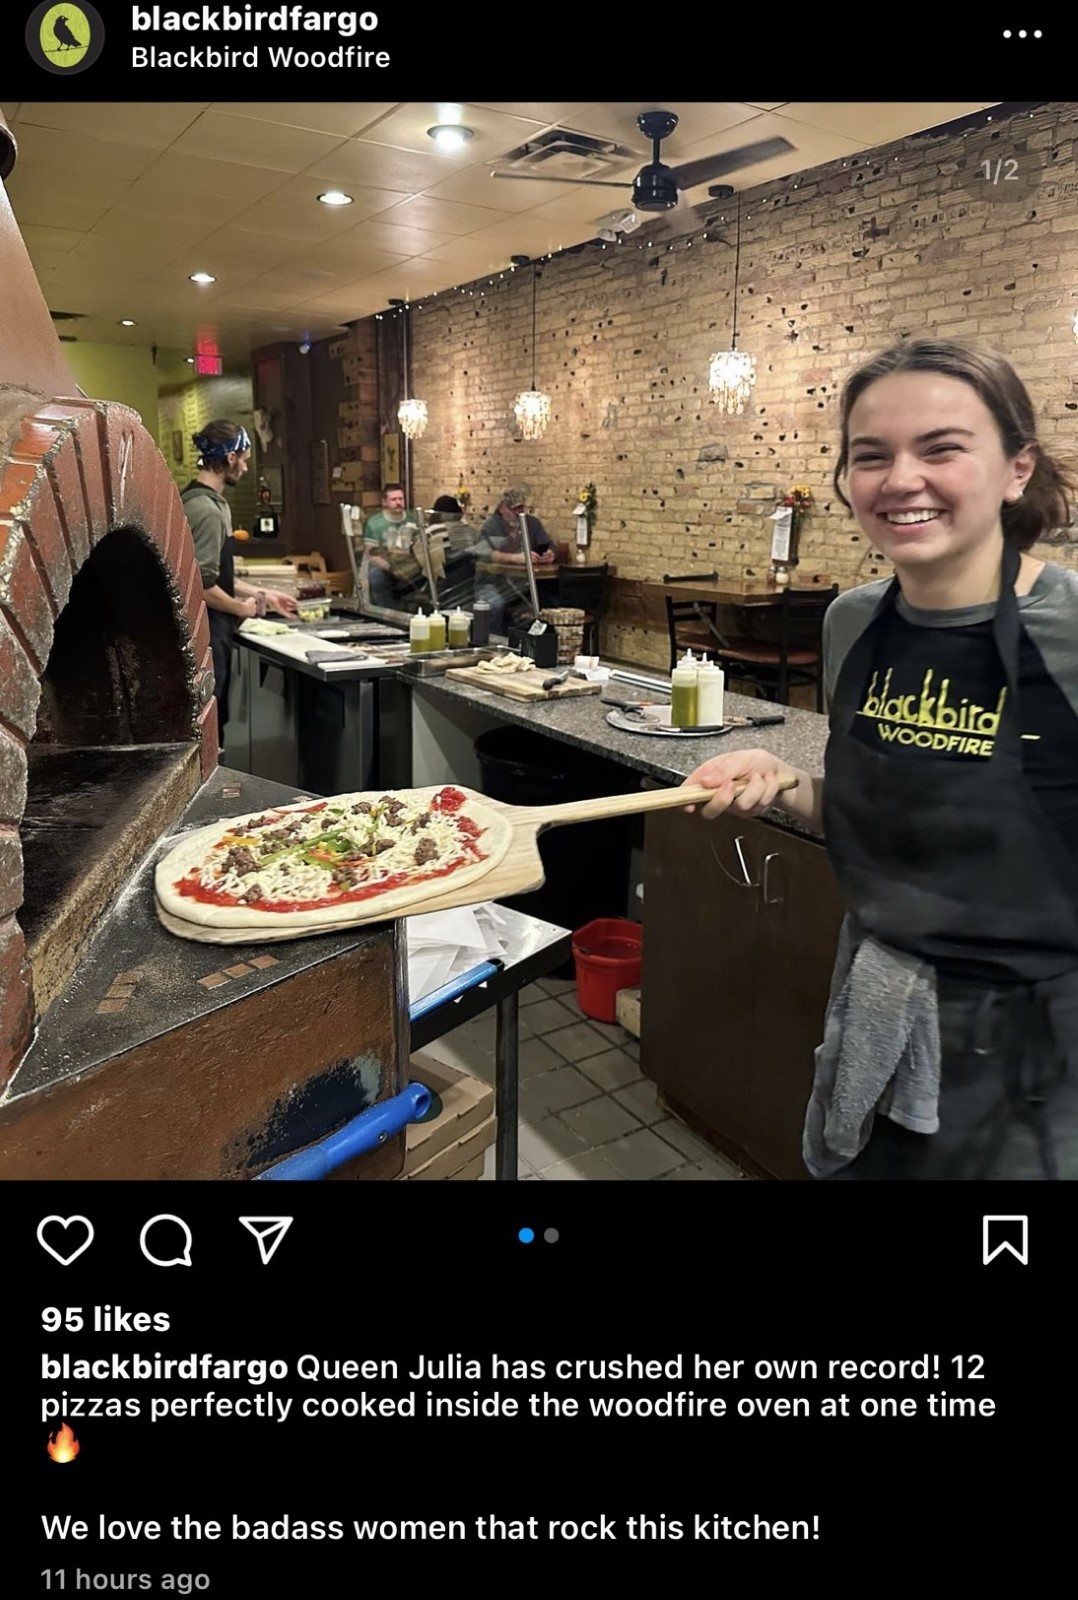 An image that shows behind-the-scenes of a Pizza bakery